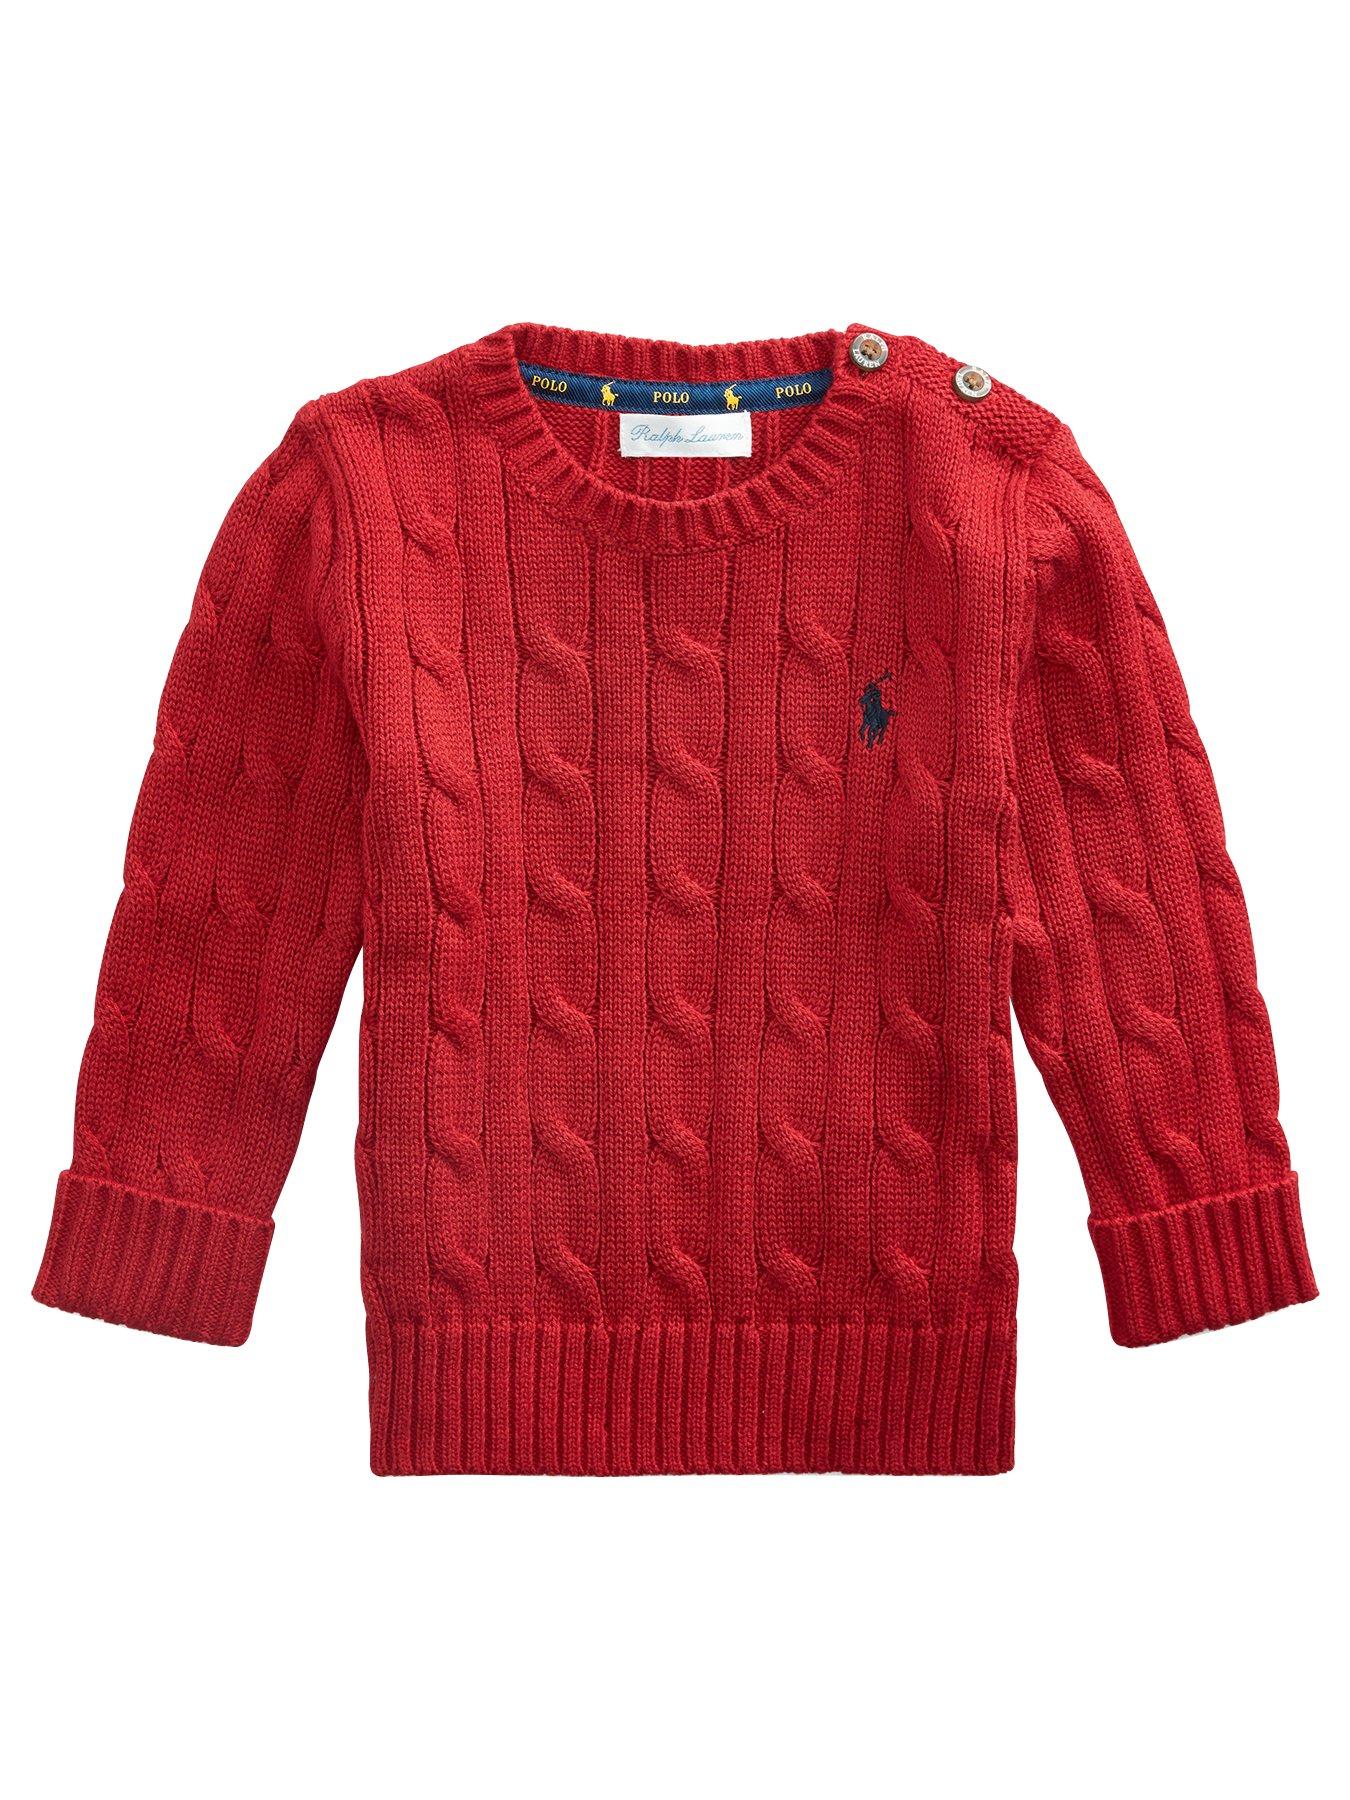 red jumper baby